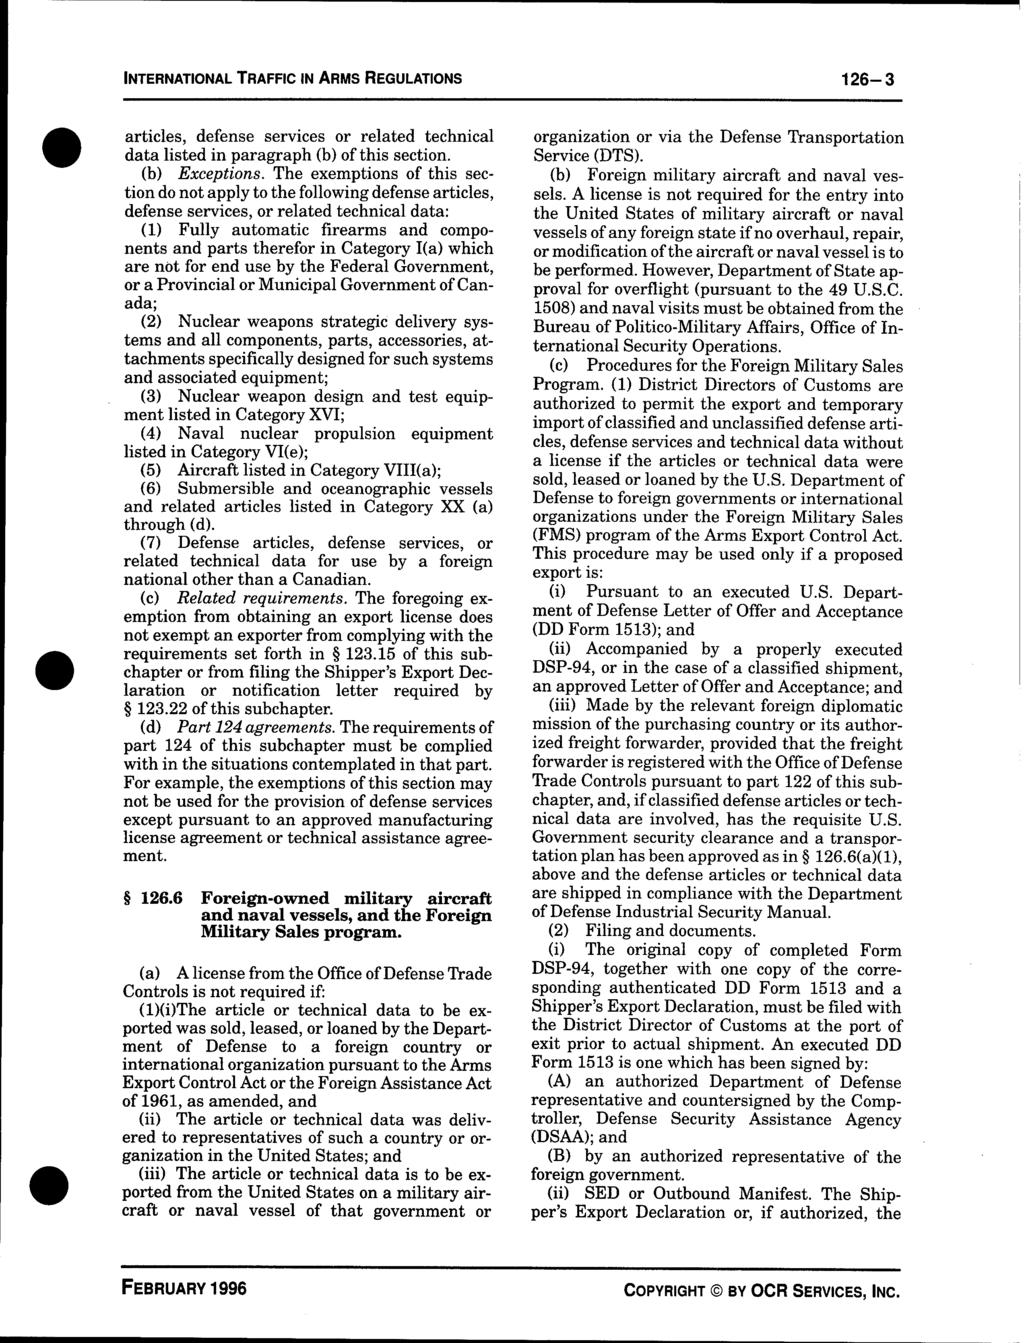 INTERNATIONAL TRAFFIC IN ARMS REGULATIONS 126-3 articles, defense services or related technical data listed in paragraph (b) of this section. (b) Exceptions.